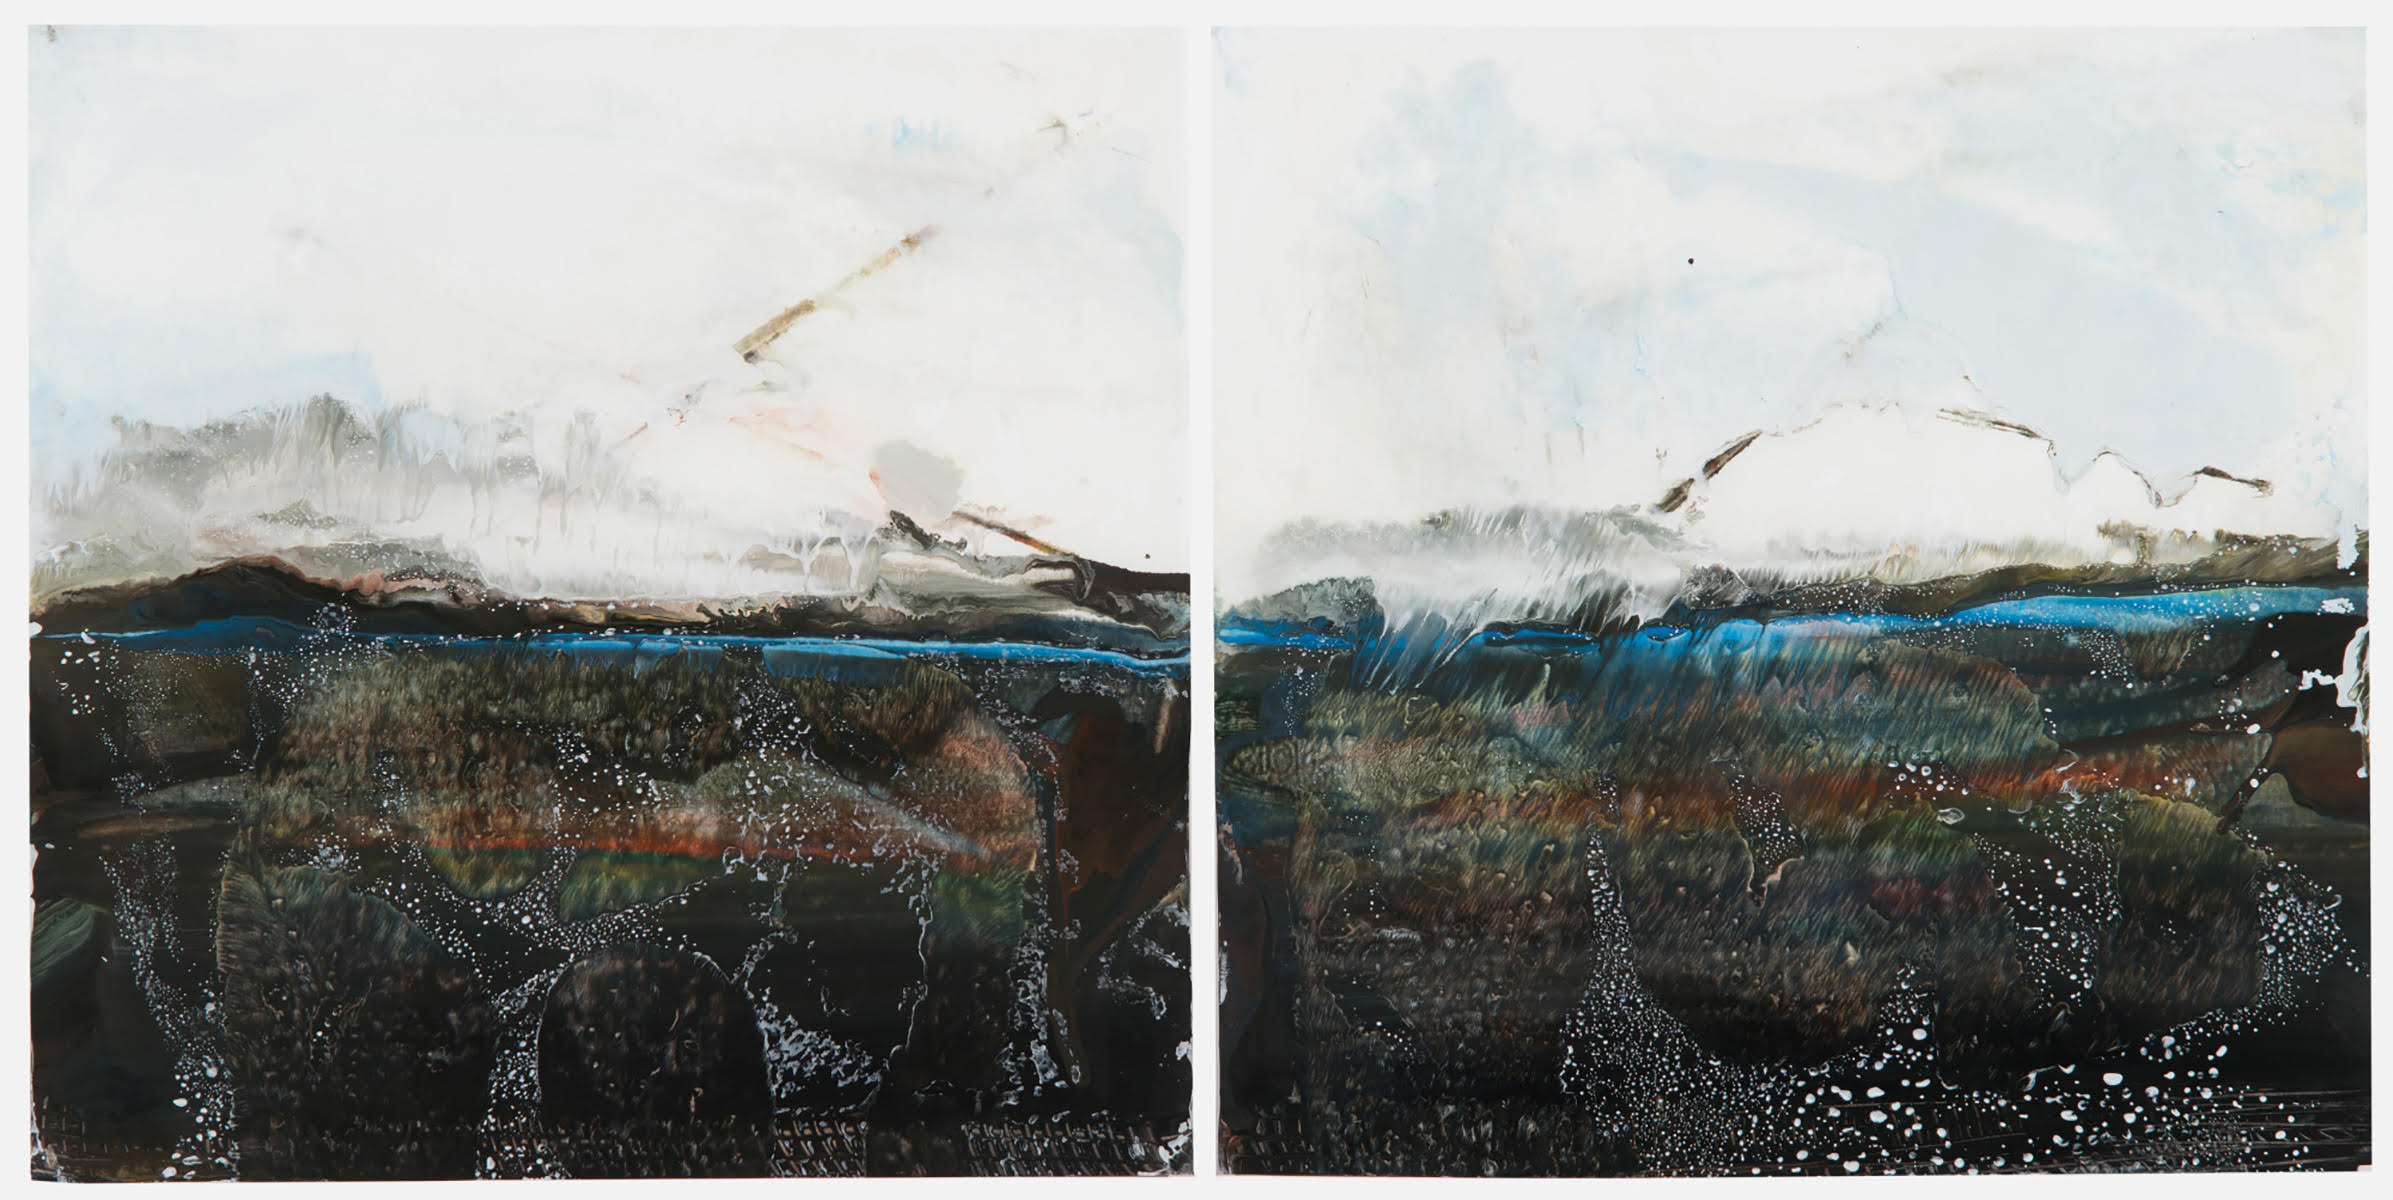 Guinea Fowl at the Beach, 2018, encaustic on paper, 24 x 40 in, SOLD